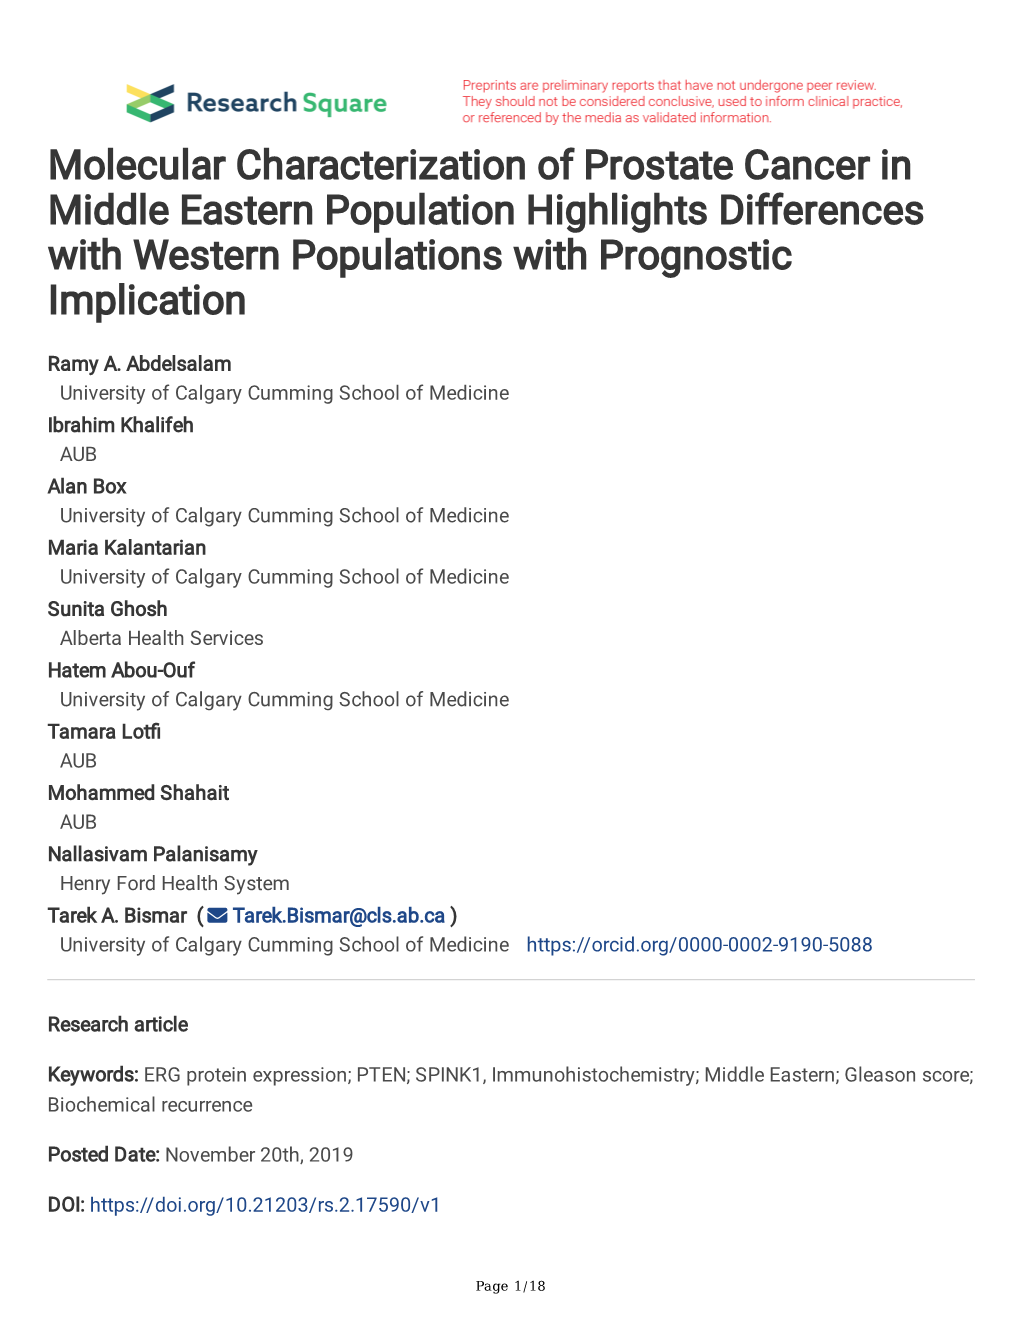 Molecular Characterization of Prostate Cancer in Middle Eastern Population Highlights Differences with Western Populations with Prognostic Implication